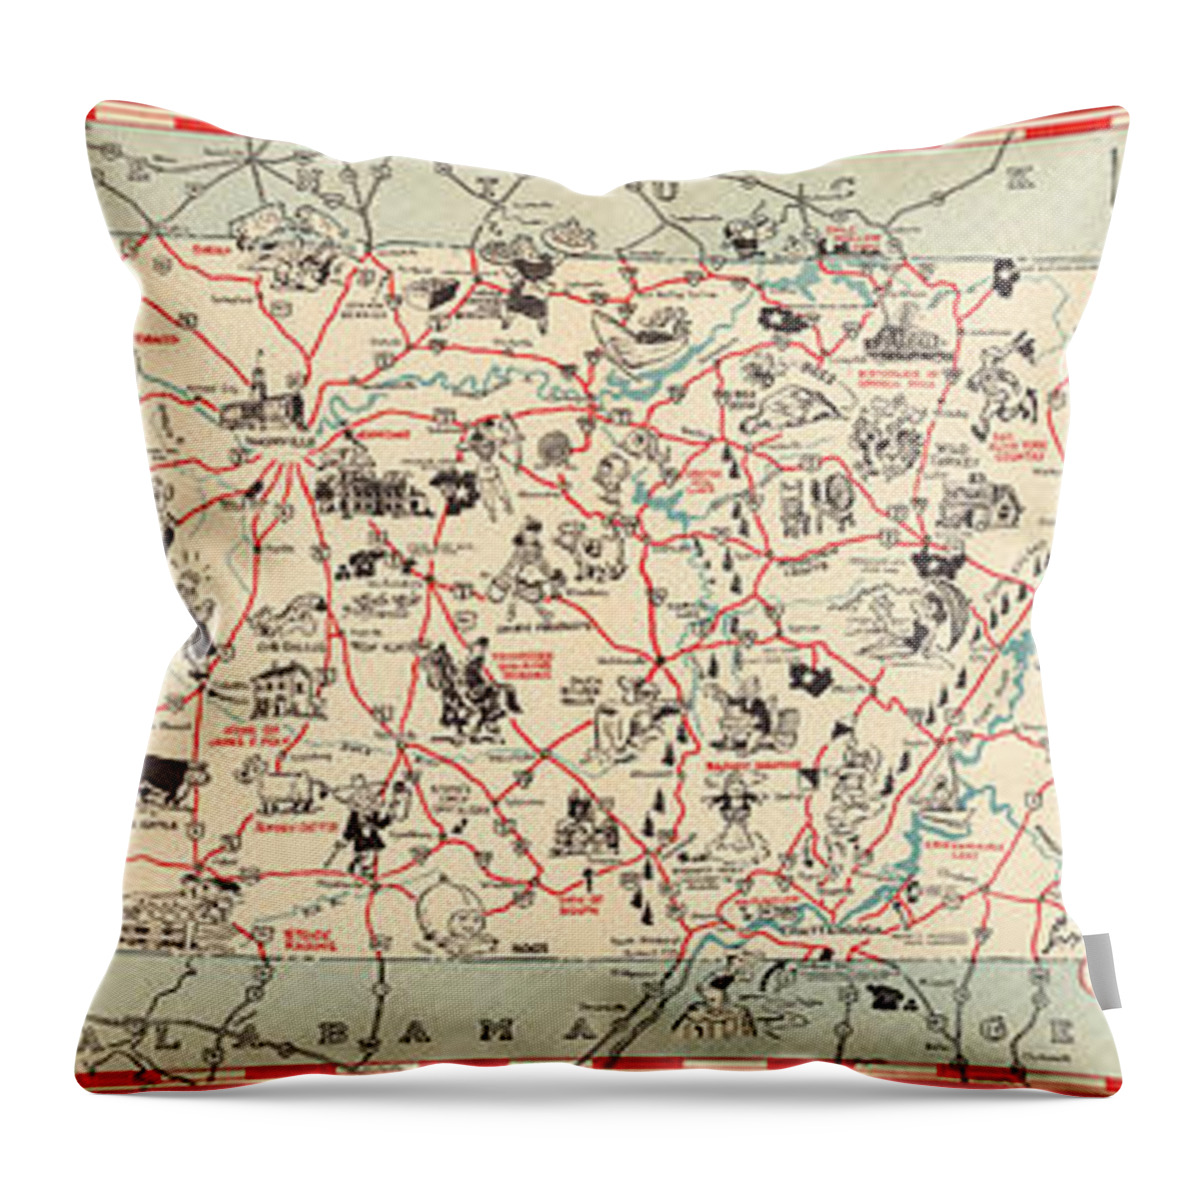 Chuckle Map Throw Pillow featuring the mixed media Chuckle Map of Tennessee - Vintage Illustrated Map - Cartoon Vignettes by Studio Grafiikka